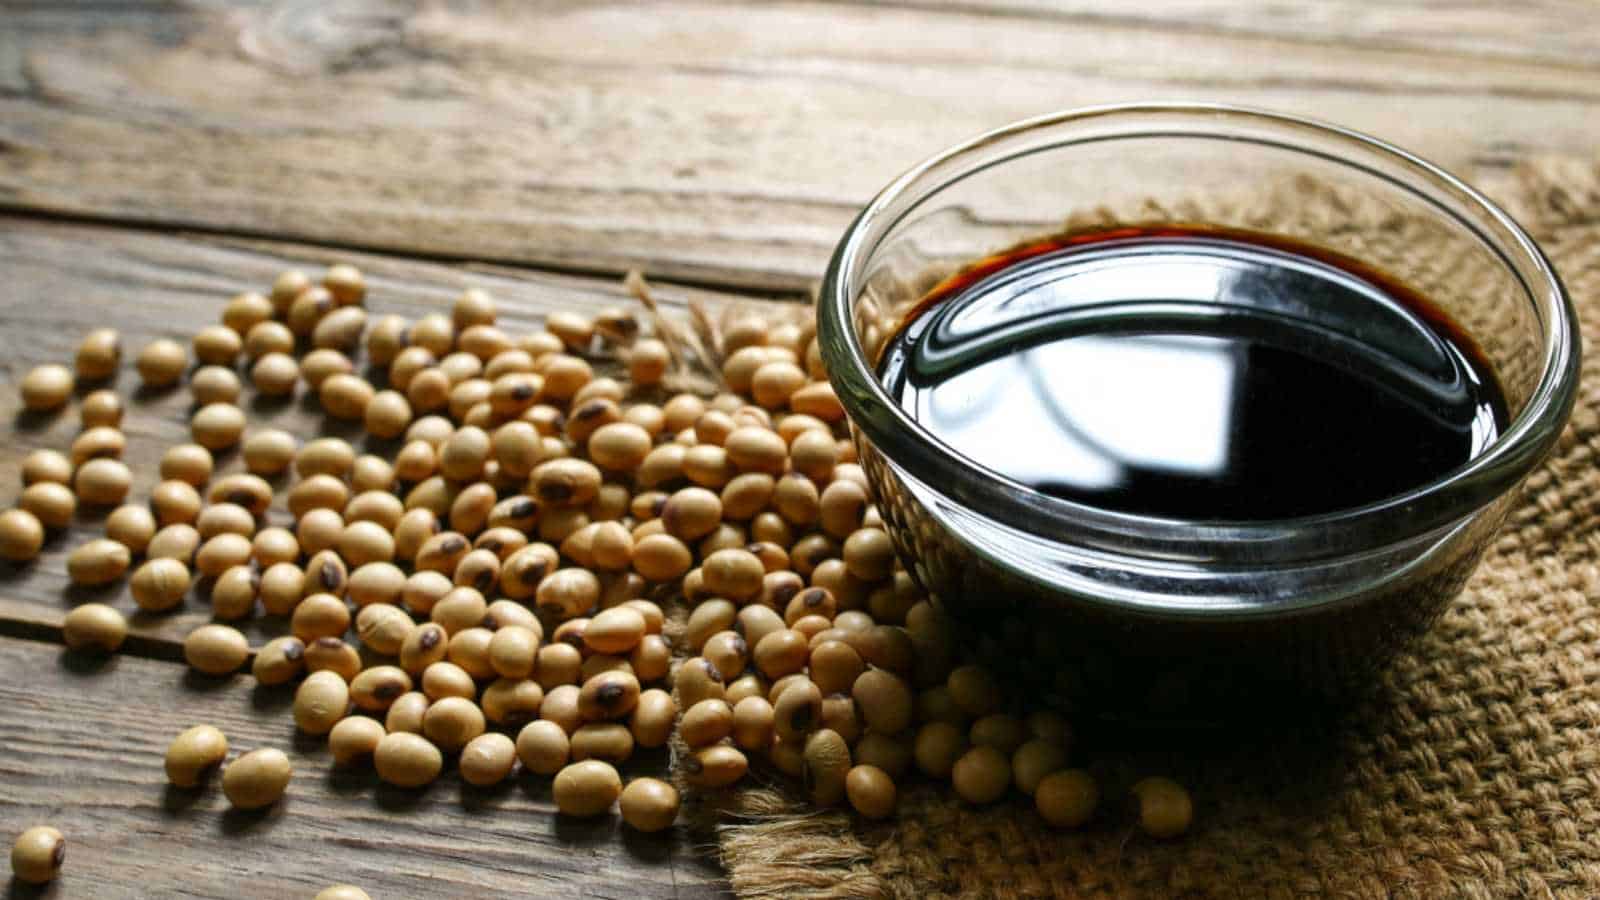 Soy sauce and soybeans on a wooden table.